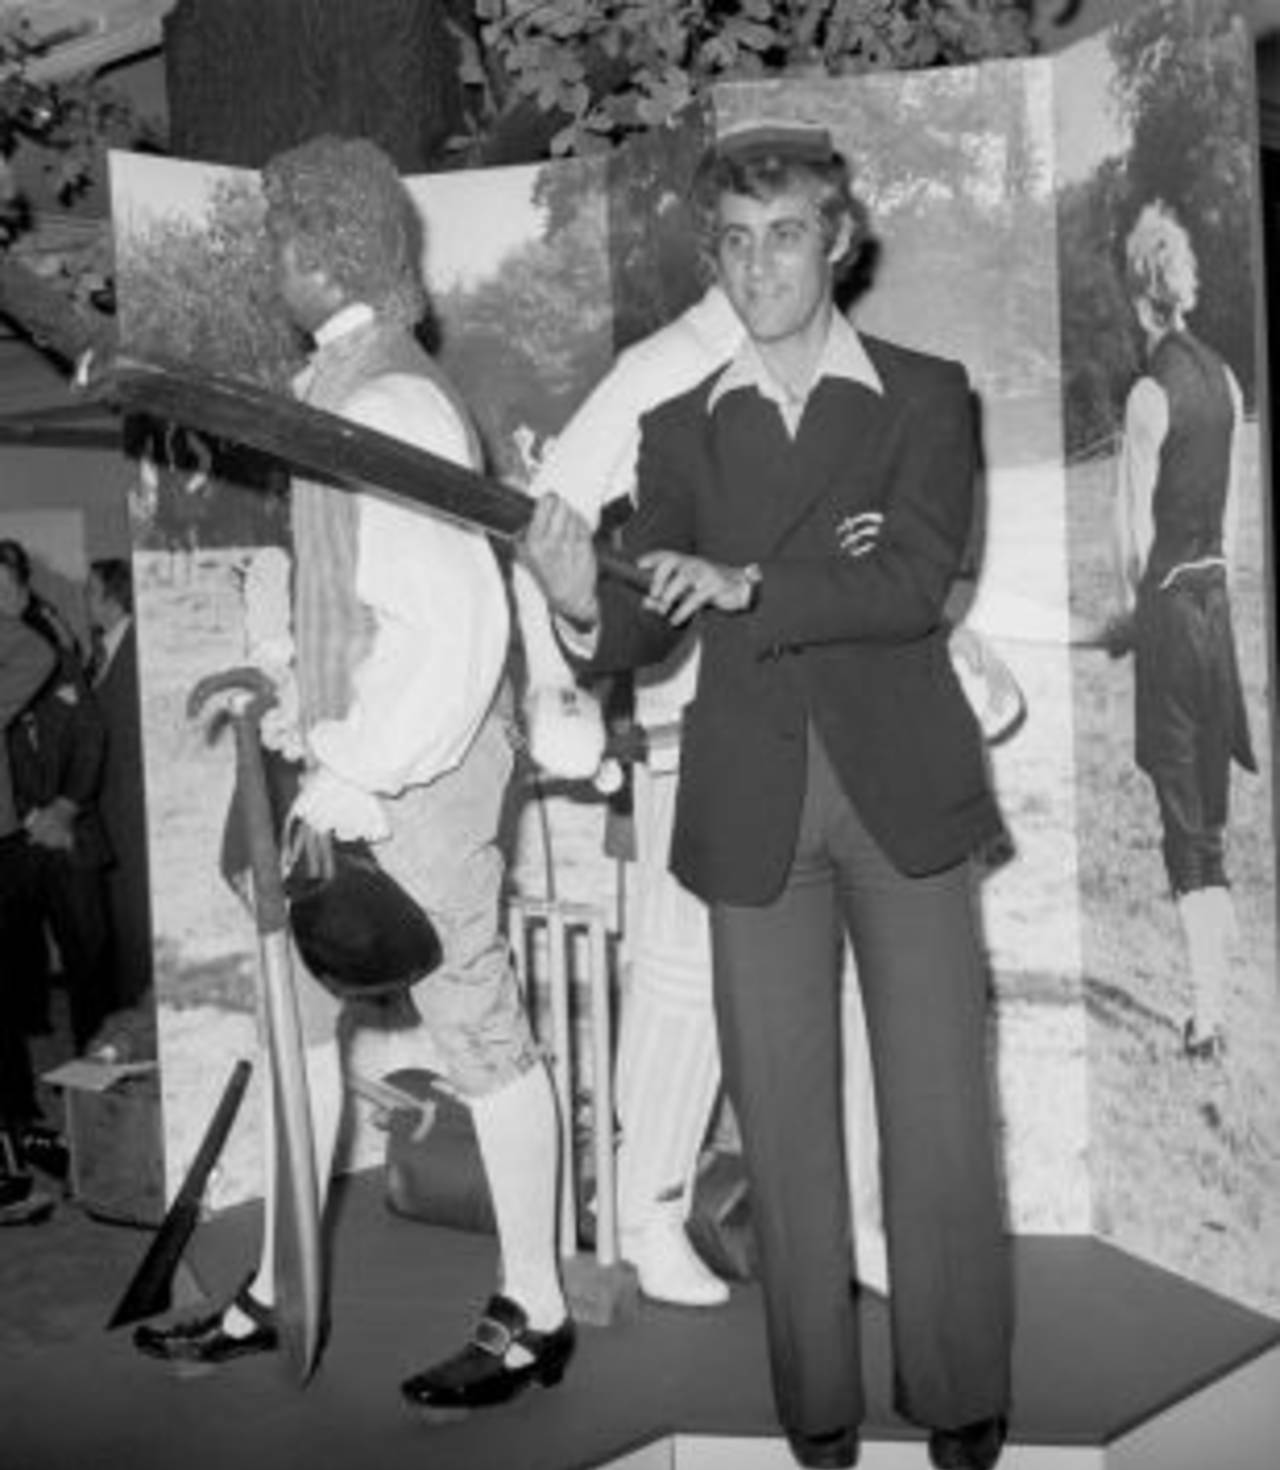 Mike Brearley opens the sports exhibition at Selfridges department store, London, September 5, 1977